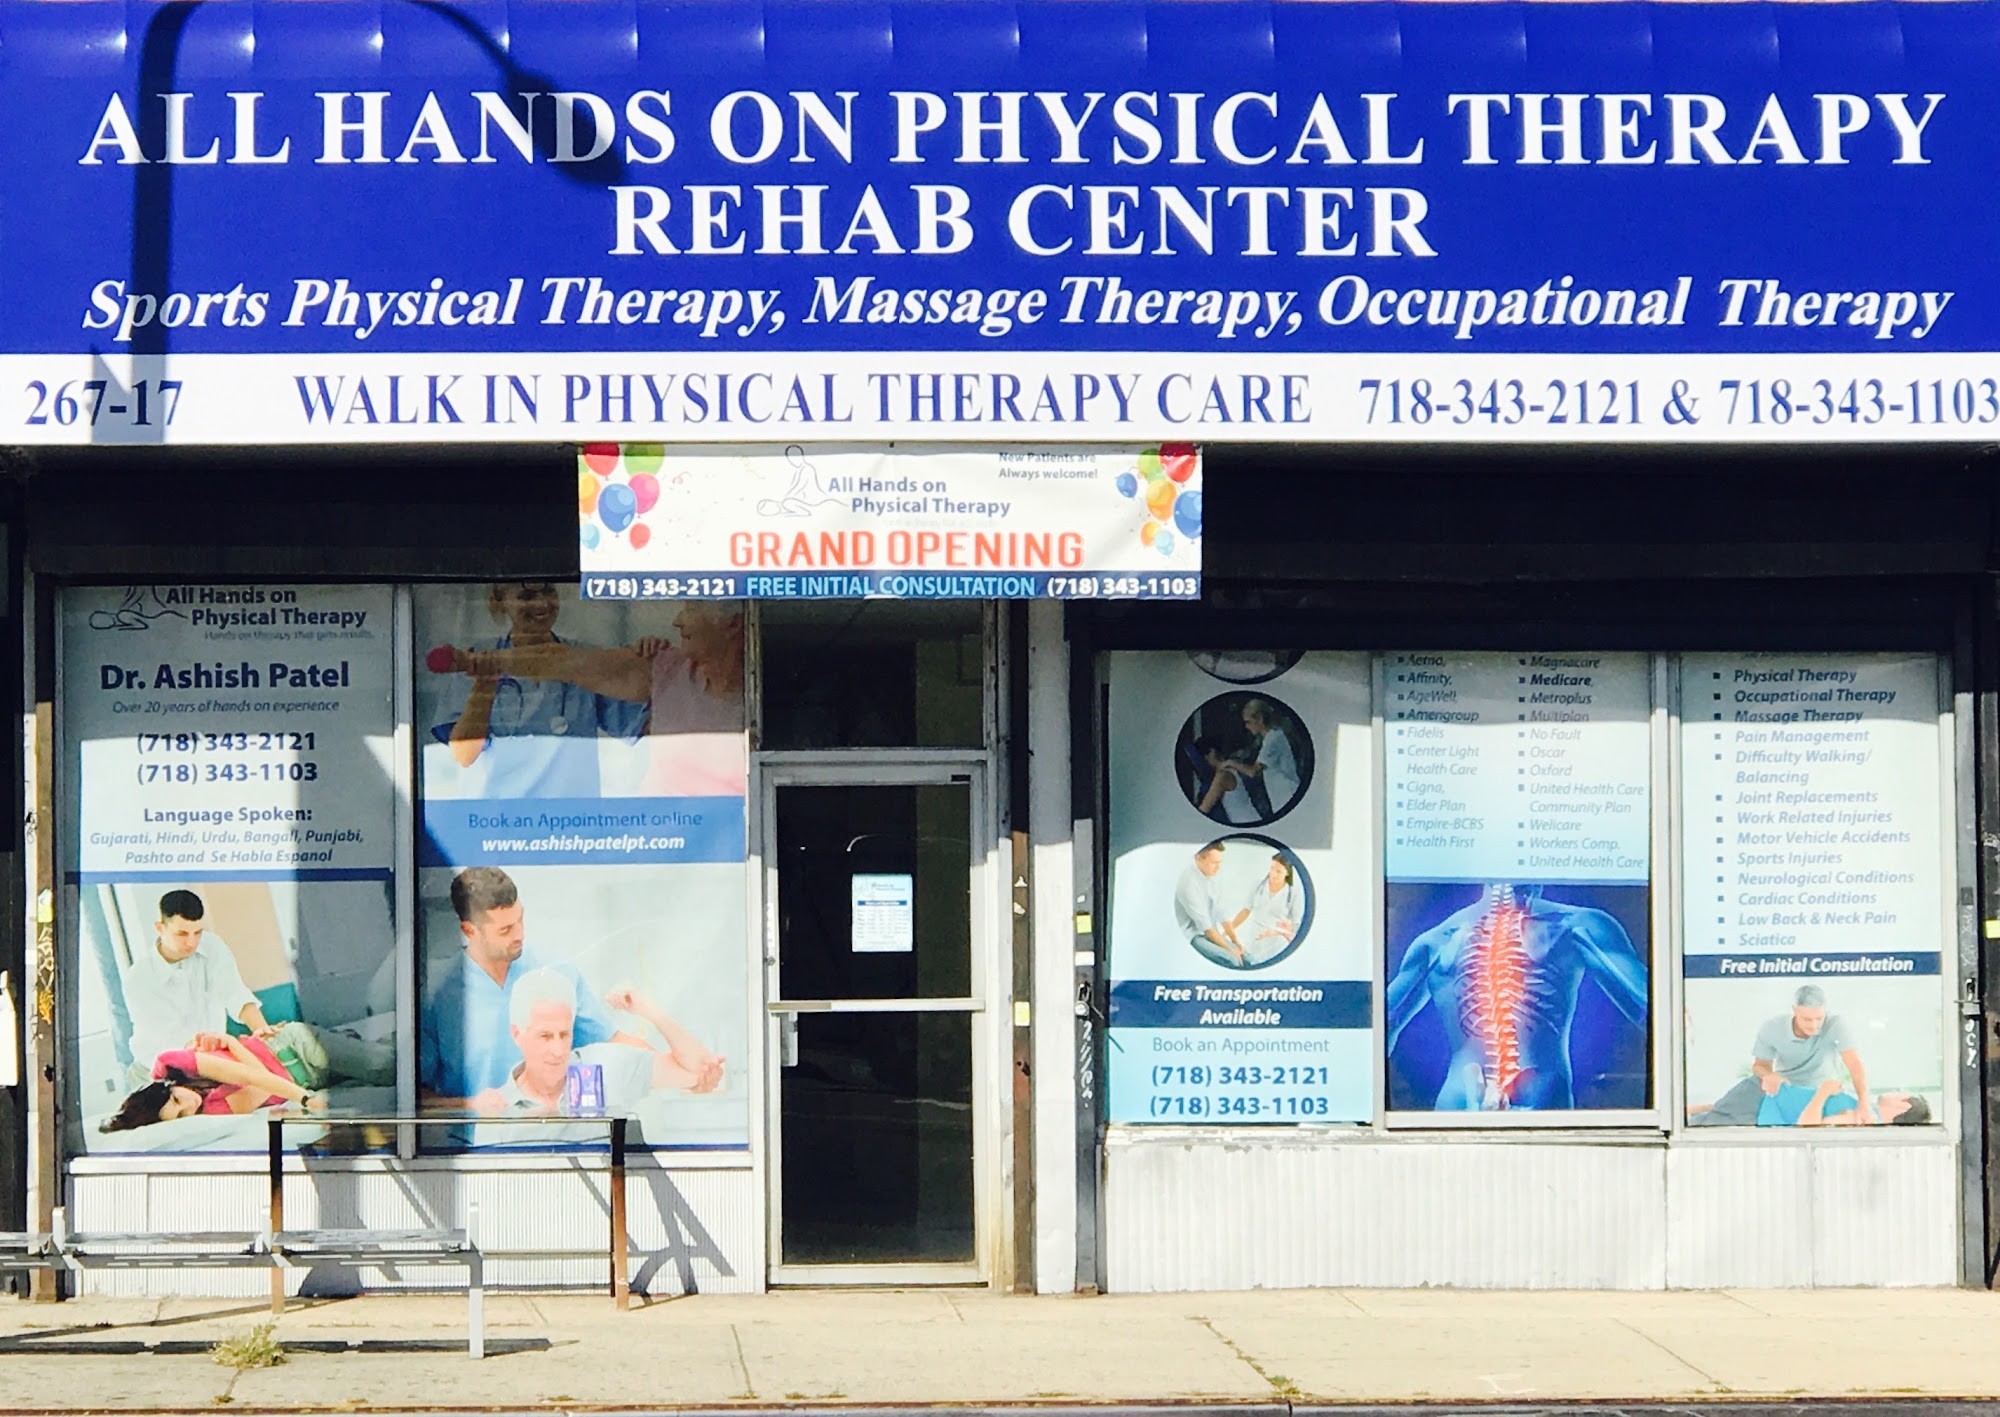 ALL HANDS ON PHYSICAL THERAPY